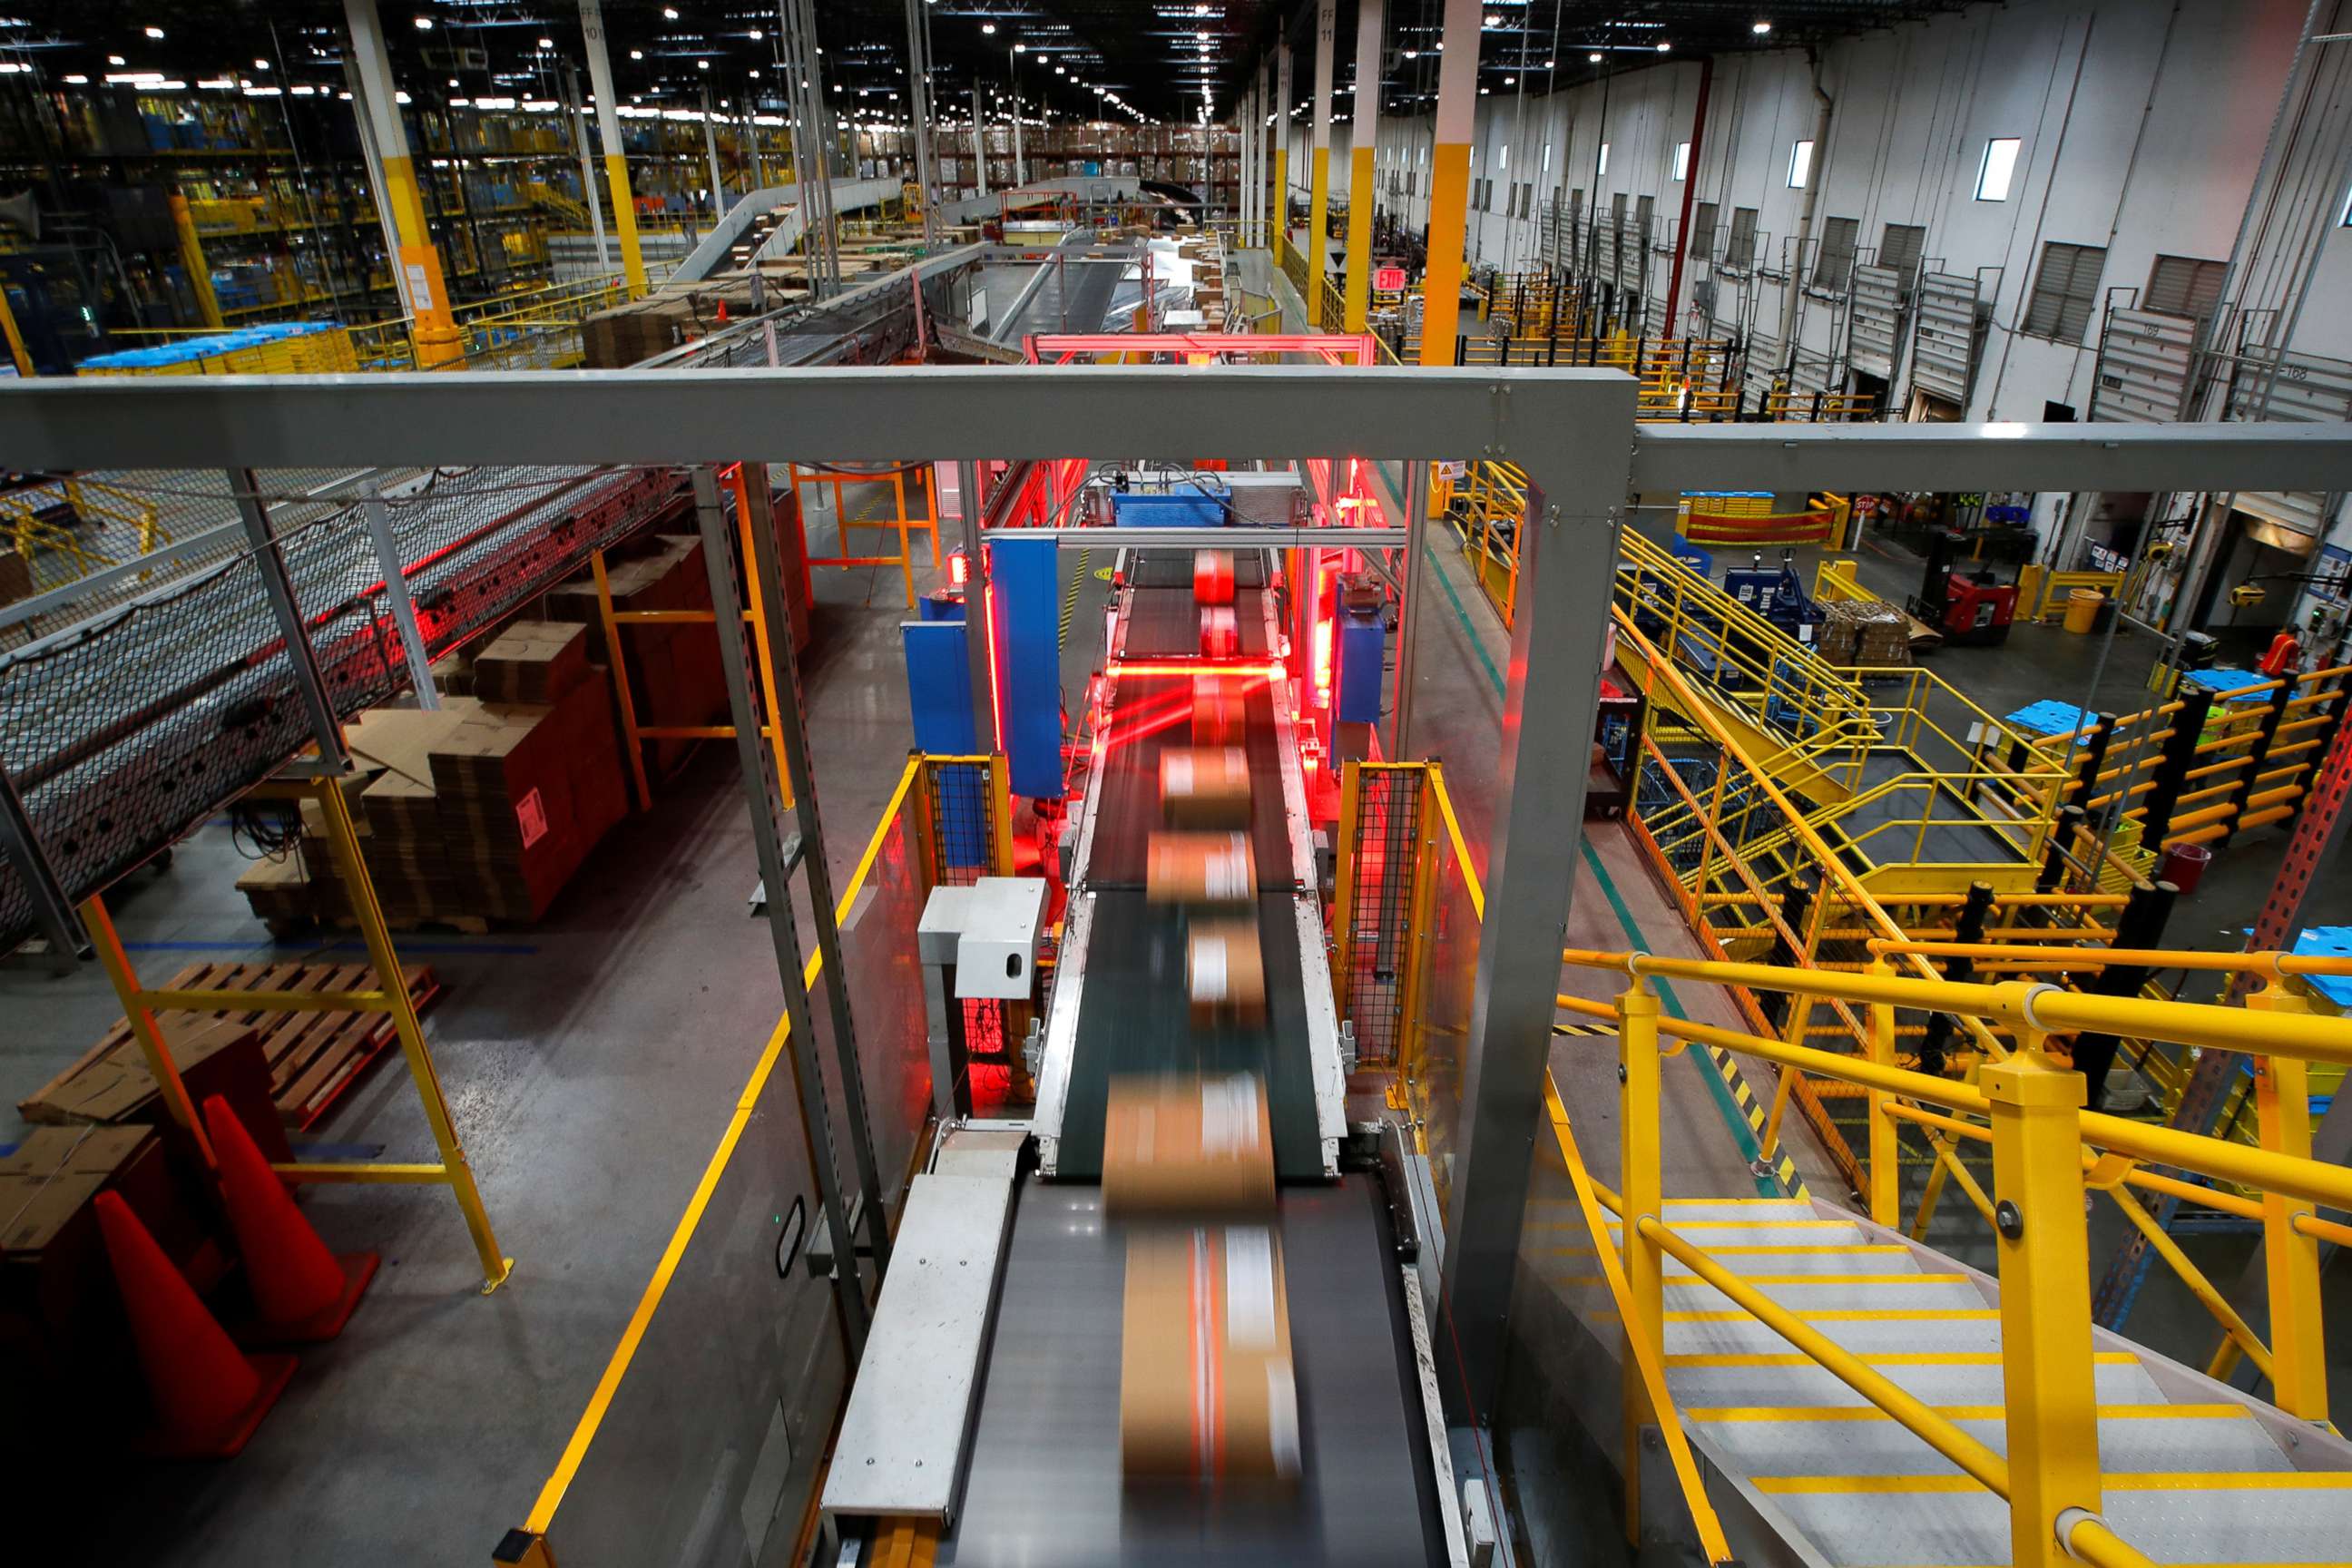 PHOTO: A fast-moving conveyor moves packages through a scanning machine on their way to delivery trucks during operations on Cyber Monday at Amazon's fulfillment center in Robbinsville, N.J., Nov. 29, 2021.